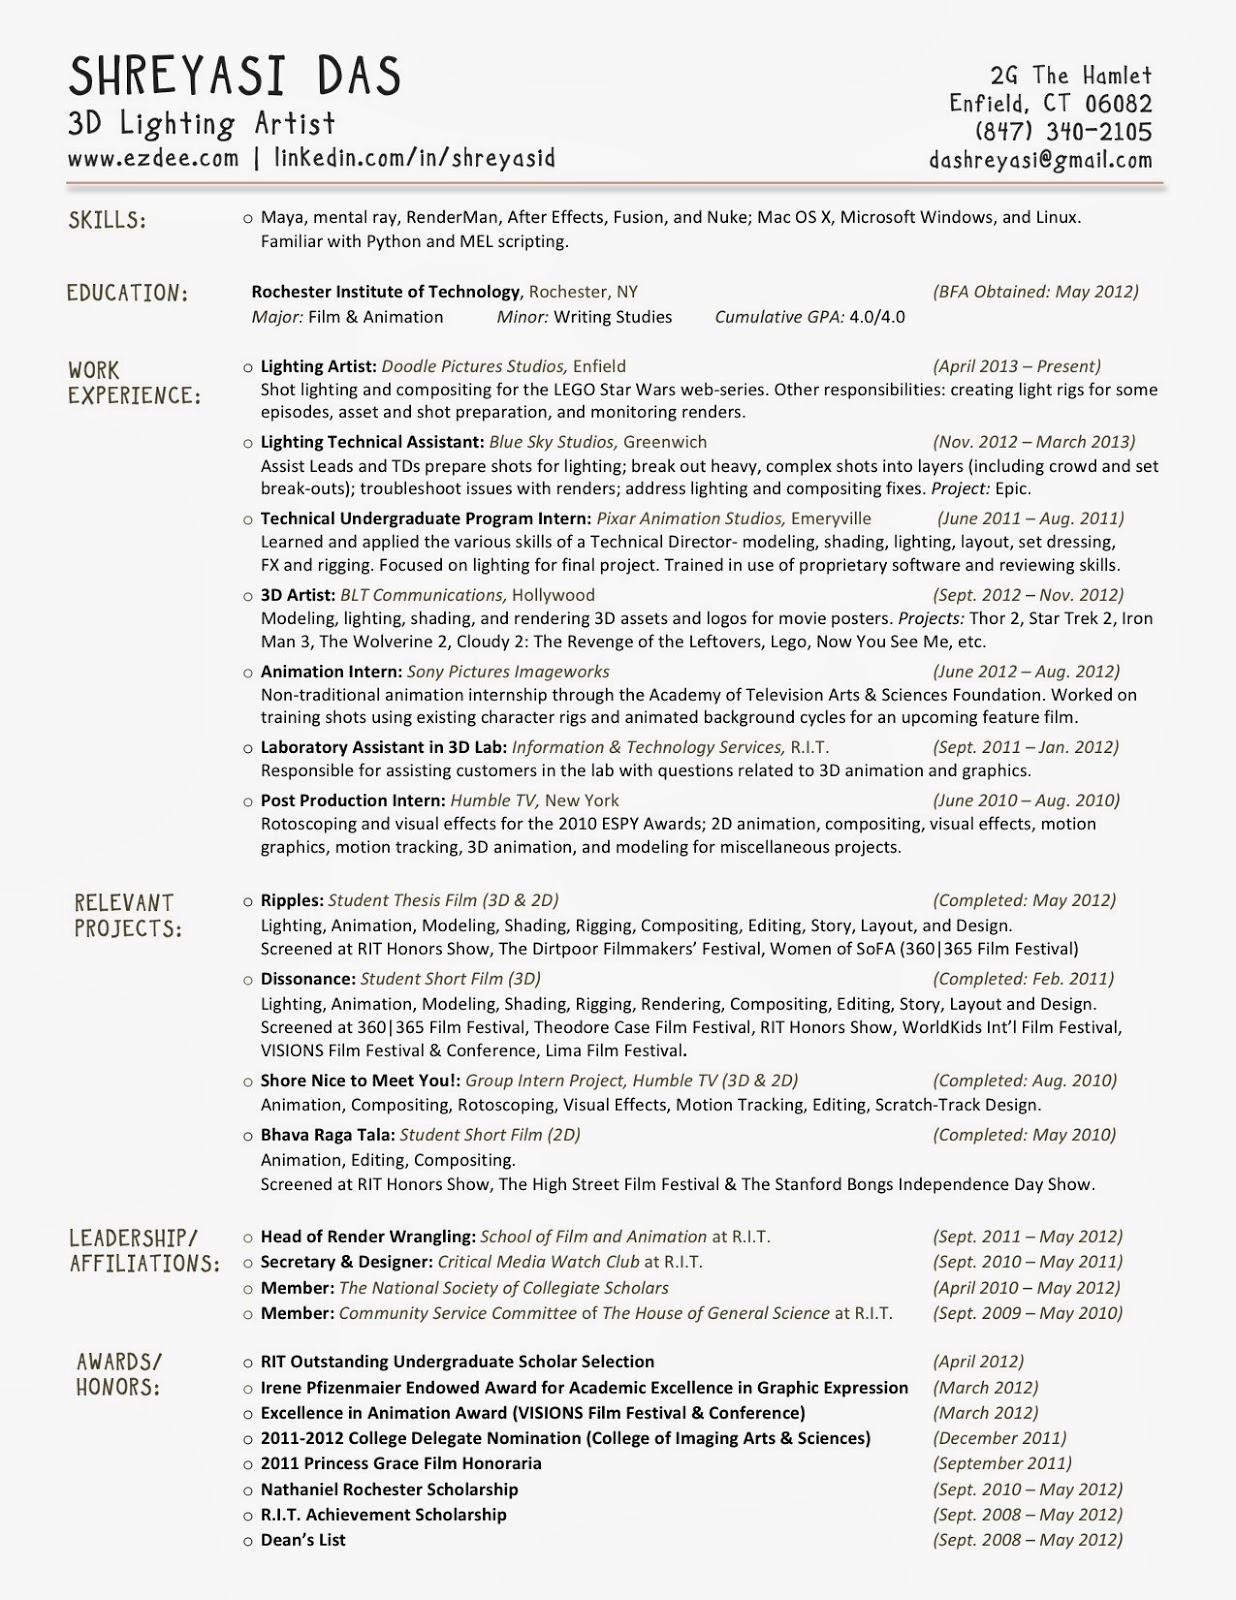 resume format references available upon request